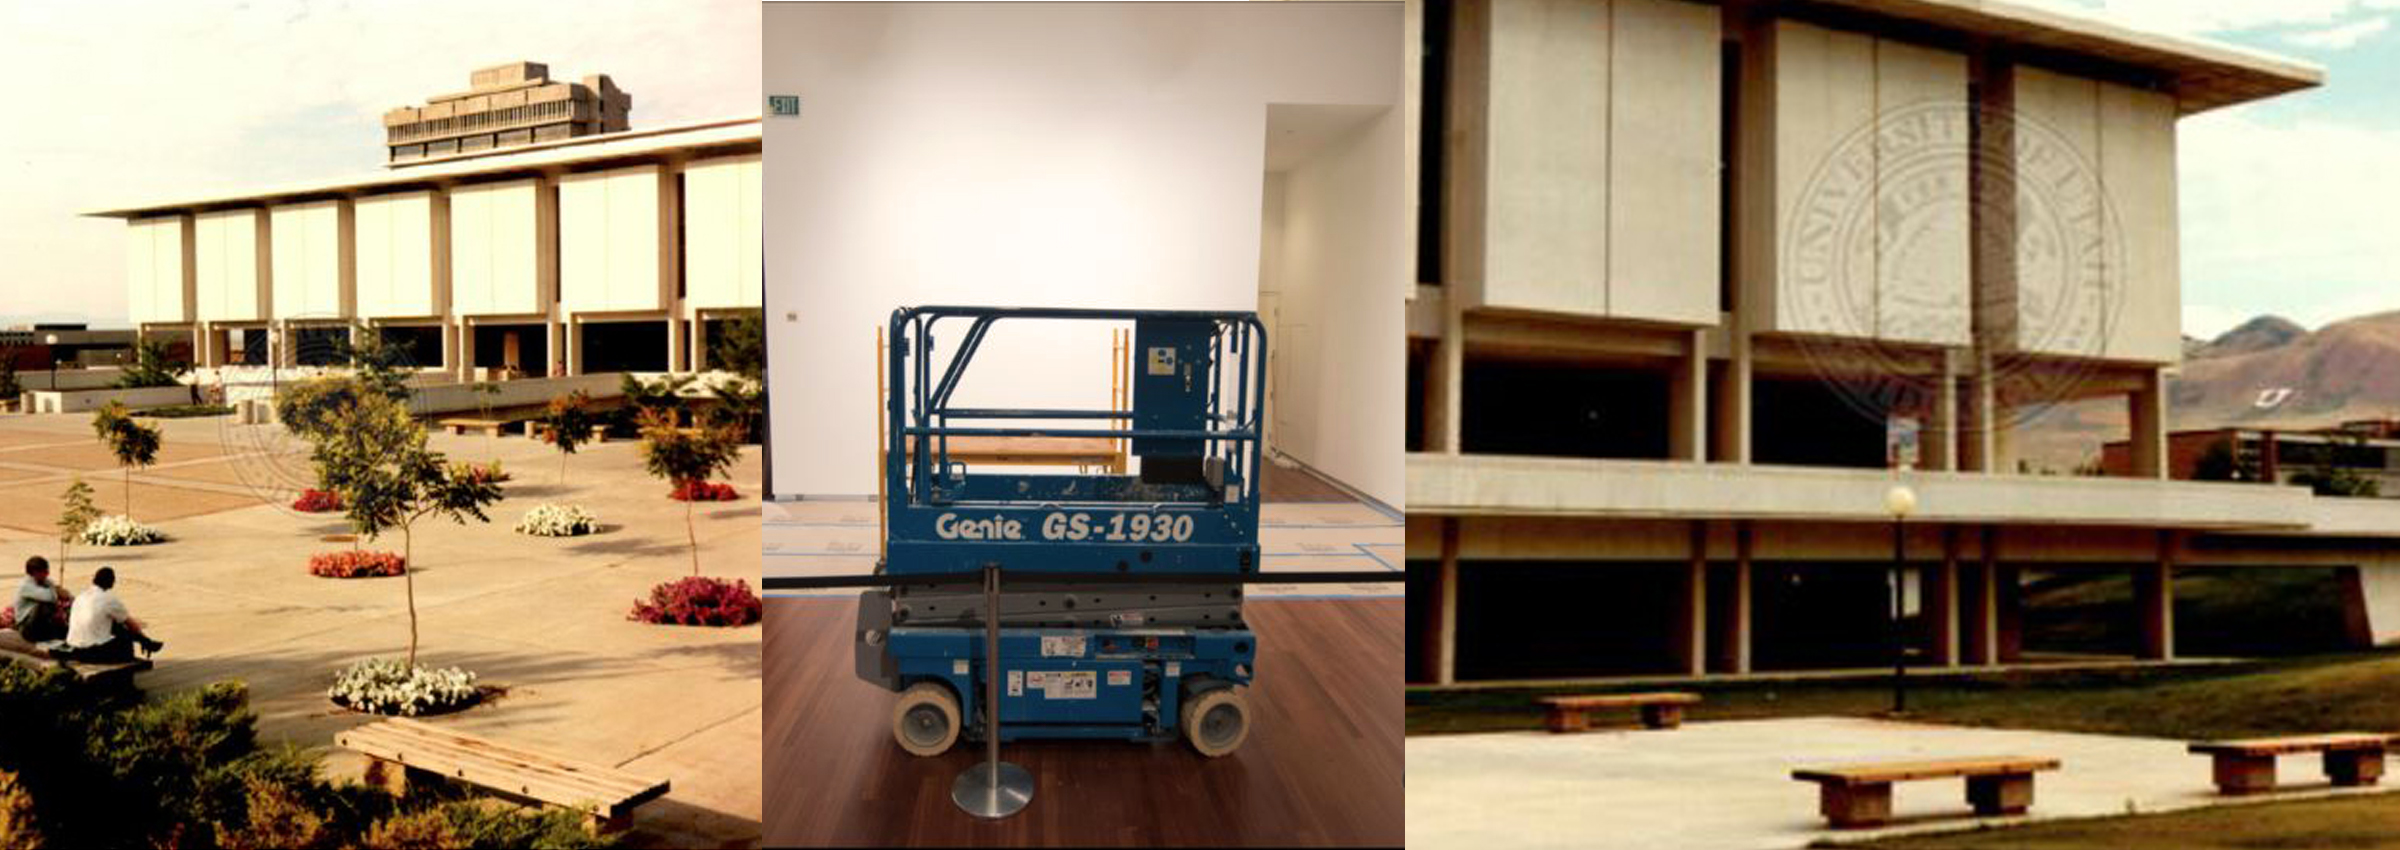 A composite of three images, two vintage images of the Marriott Library facade sandwiching an image of a lift in the UMFA